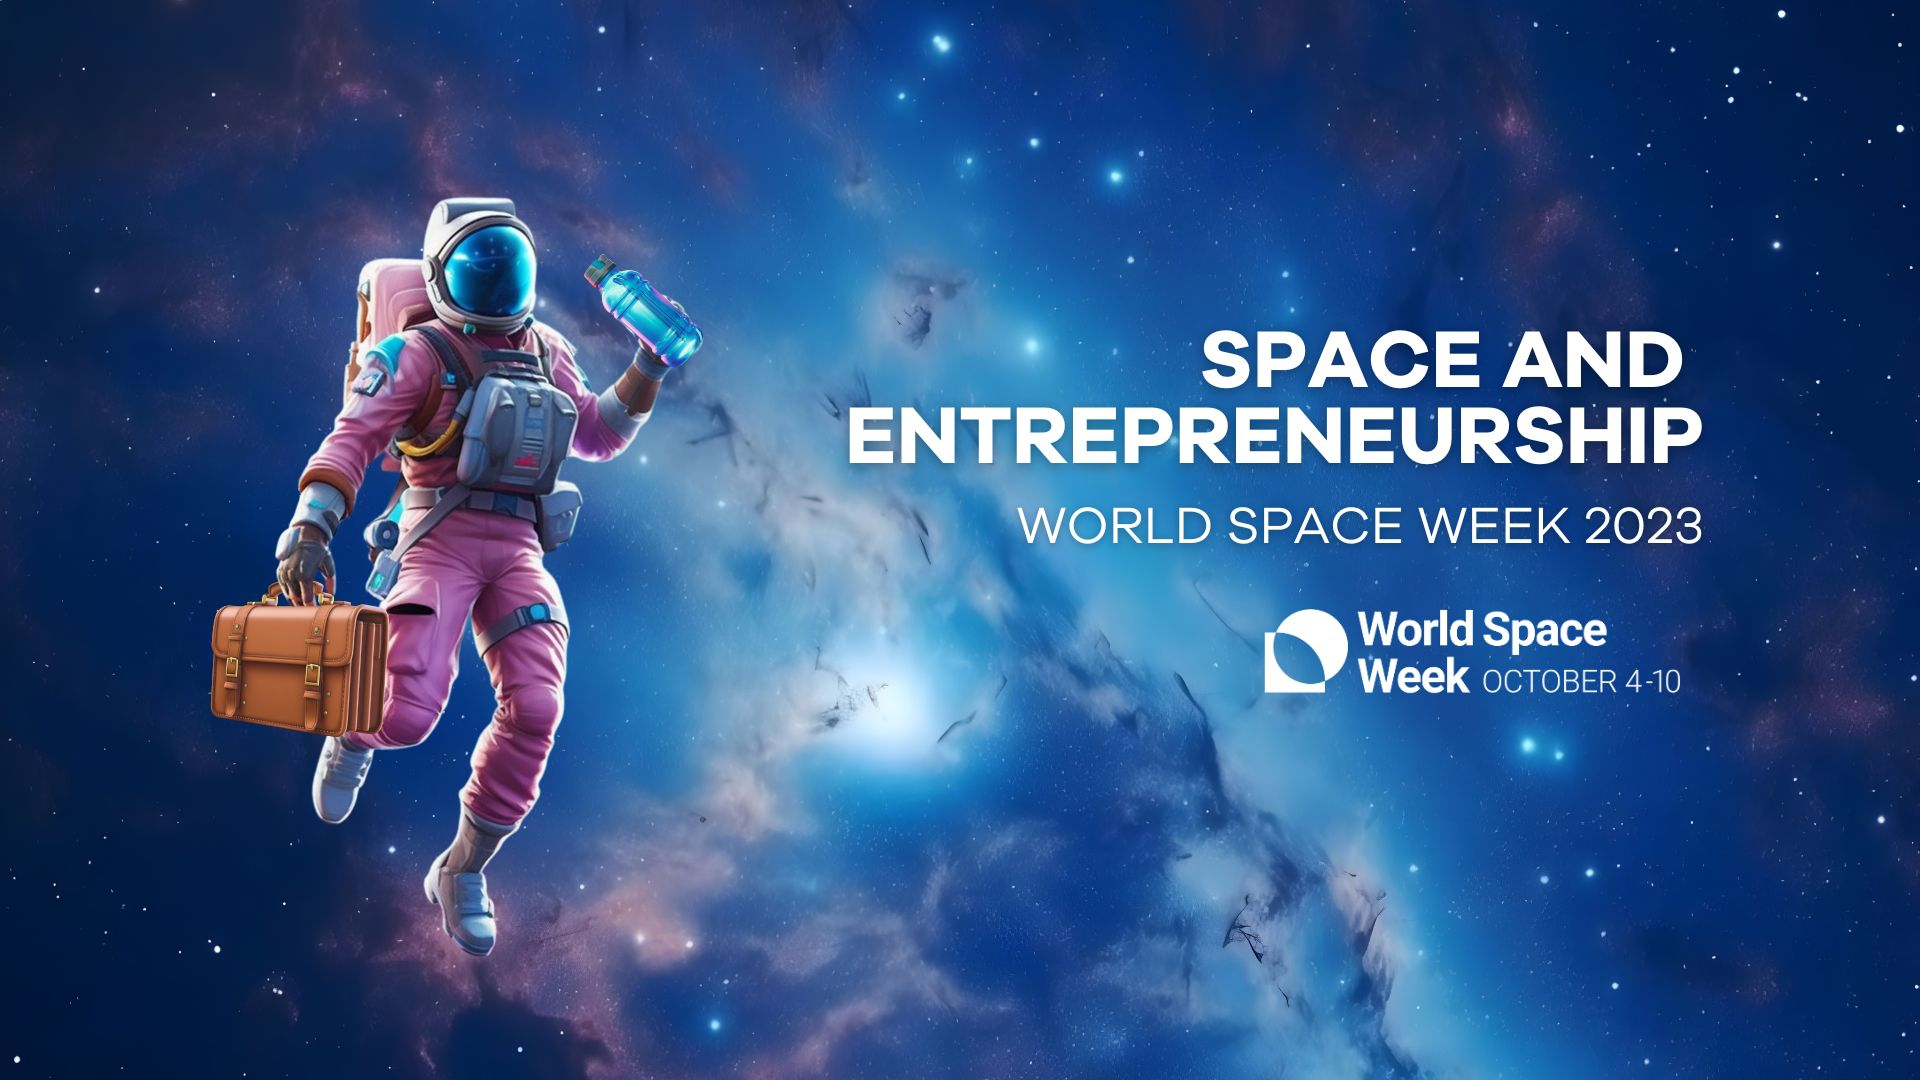 World Space Week 2023 kicks off Oct. 4 to highlight the growing private space economy